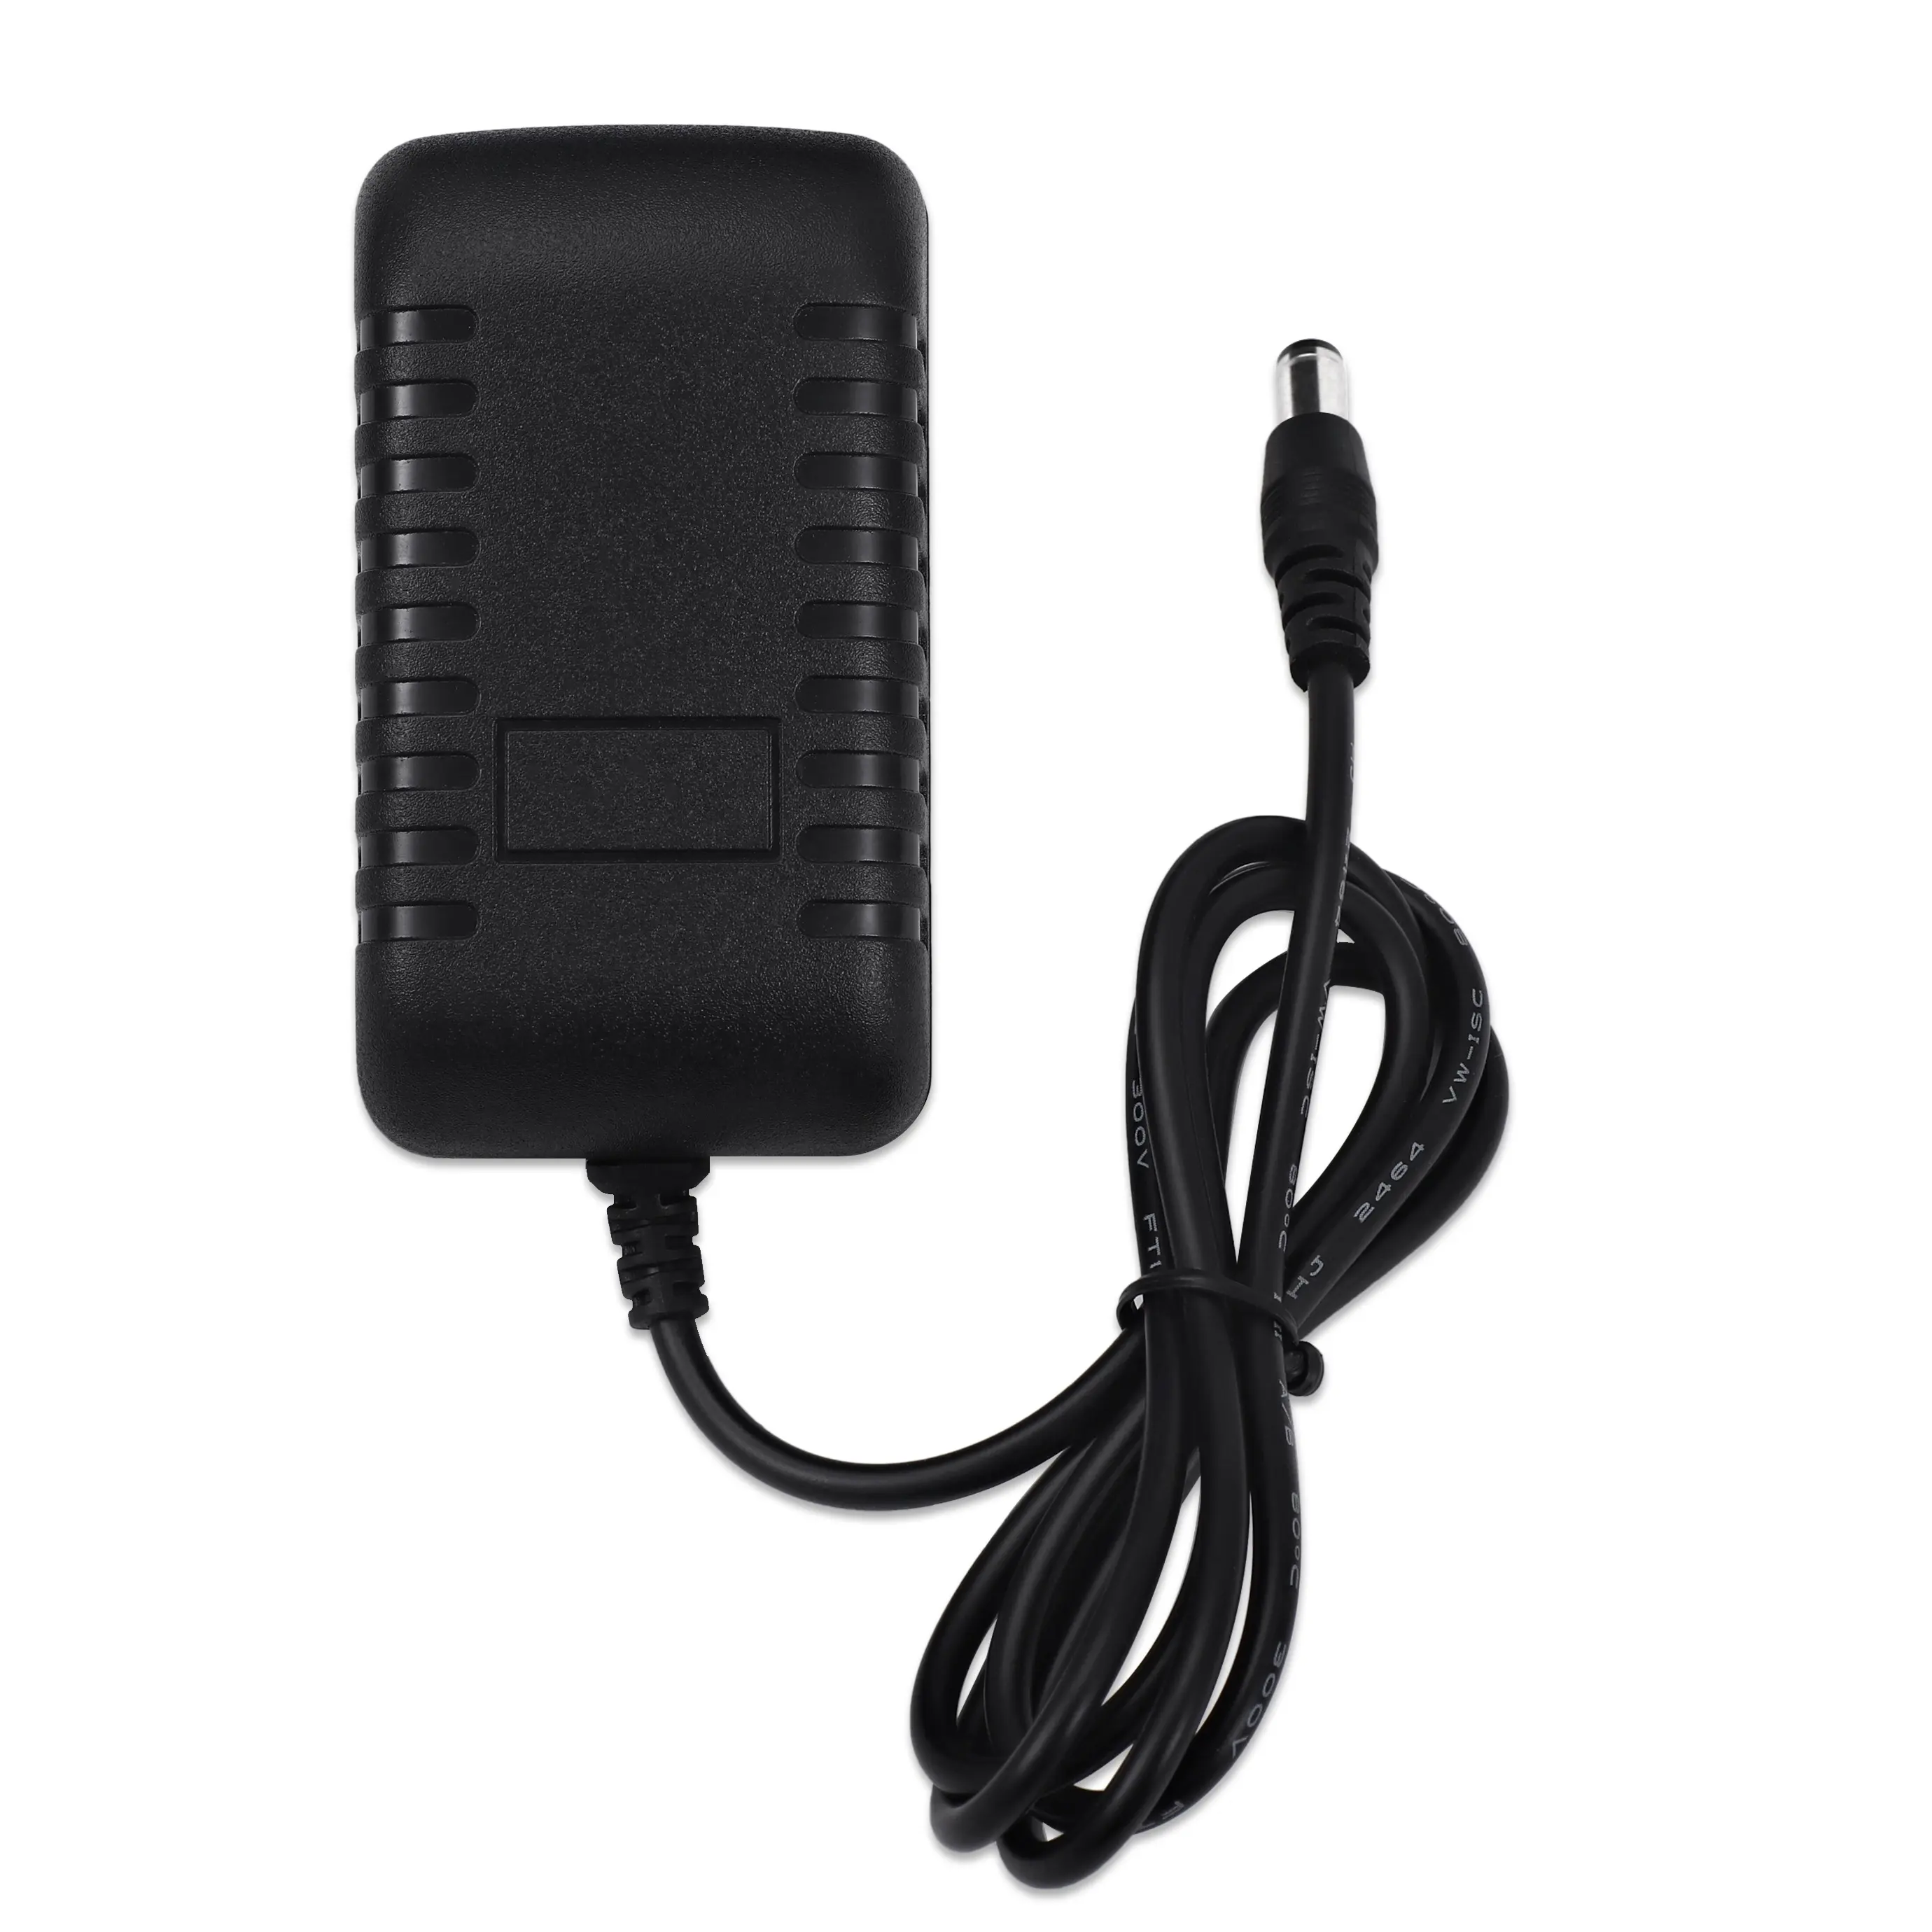 6V 9V 12V 15V 18V 0.5A 1A 1.5A 2A power supply adapter with ce 5521 pulg 5v 2a 12v power adapter for Network TV switches